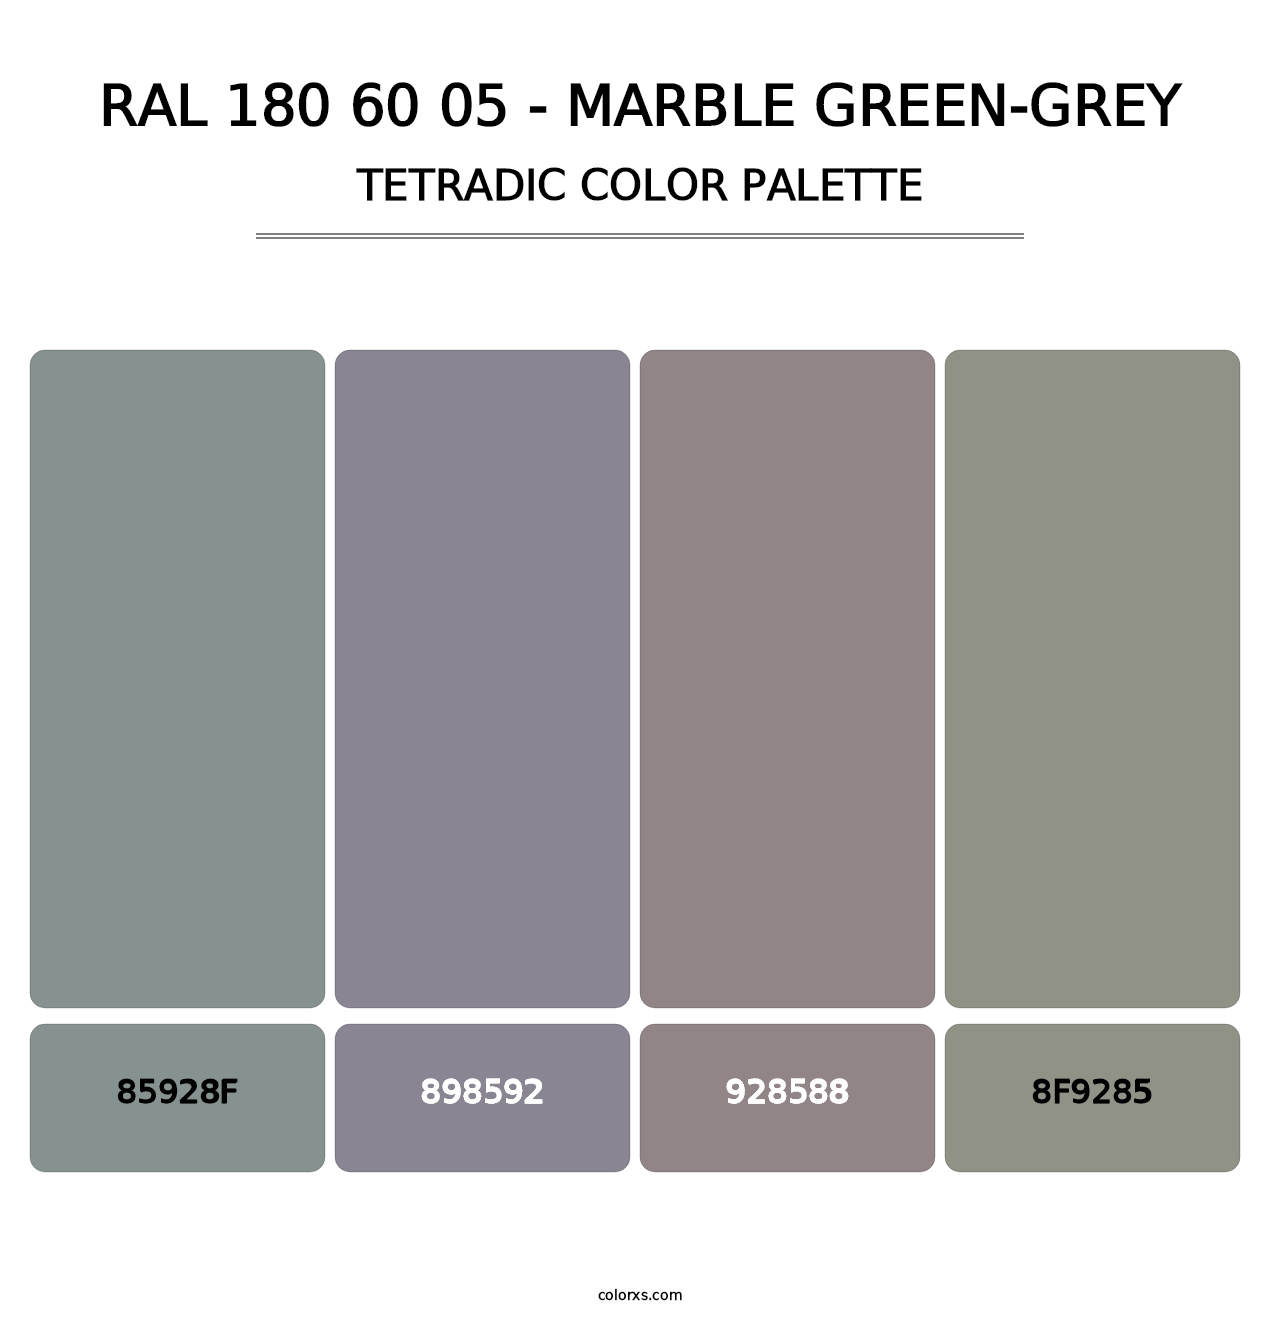 RAL 180 60 05 - Marble Green-Grey - Tetradic Color Palette